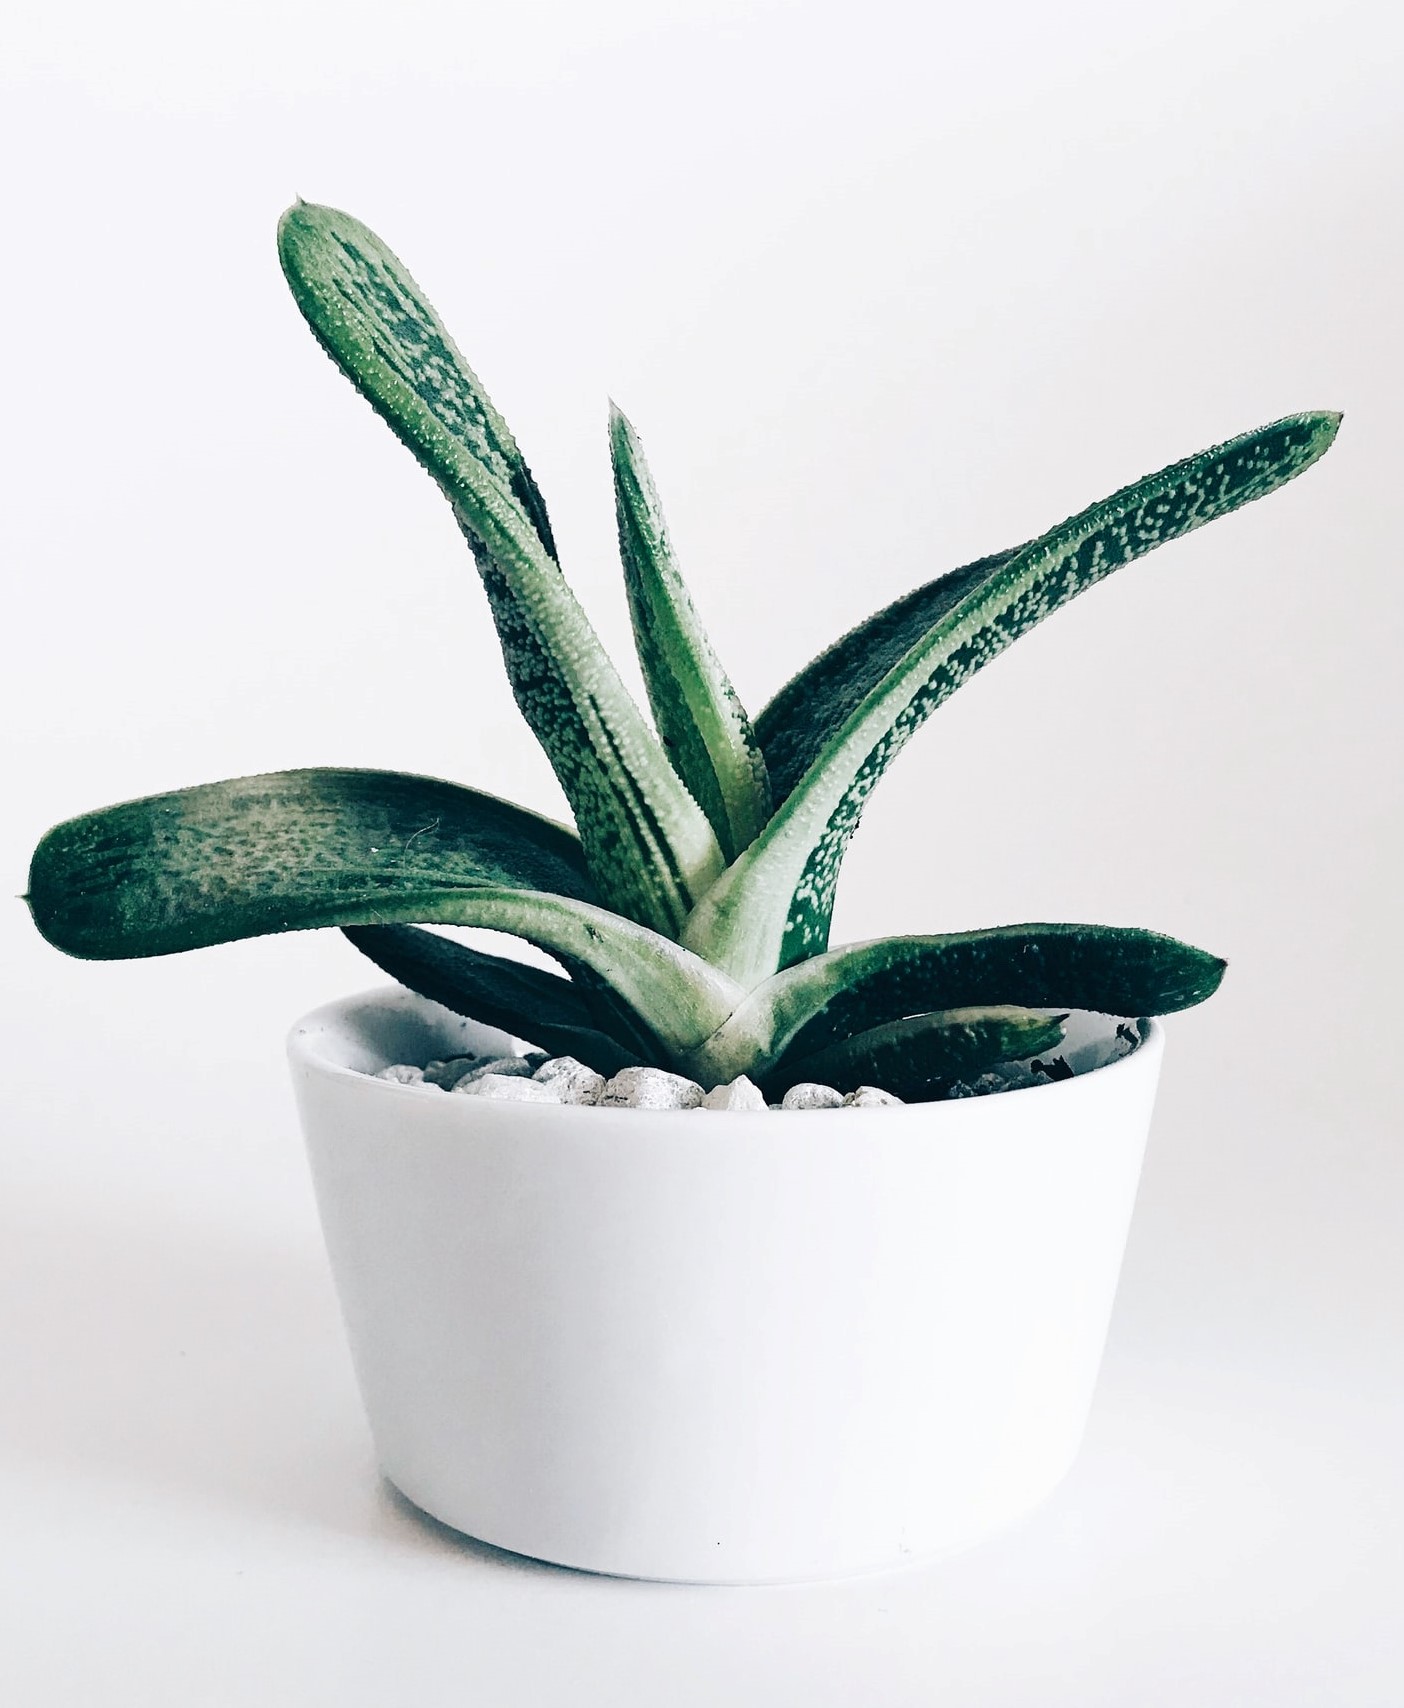 Small succulent in a pot with a minimalist background